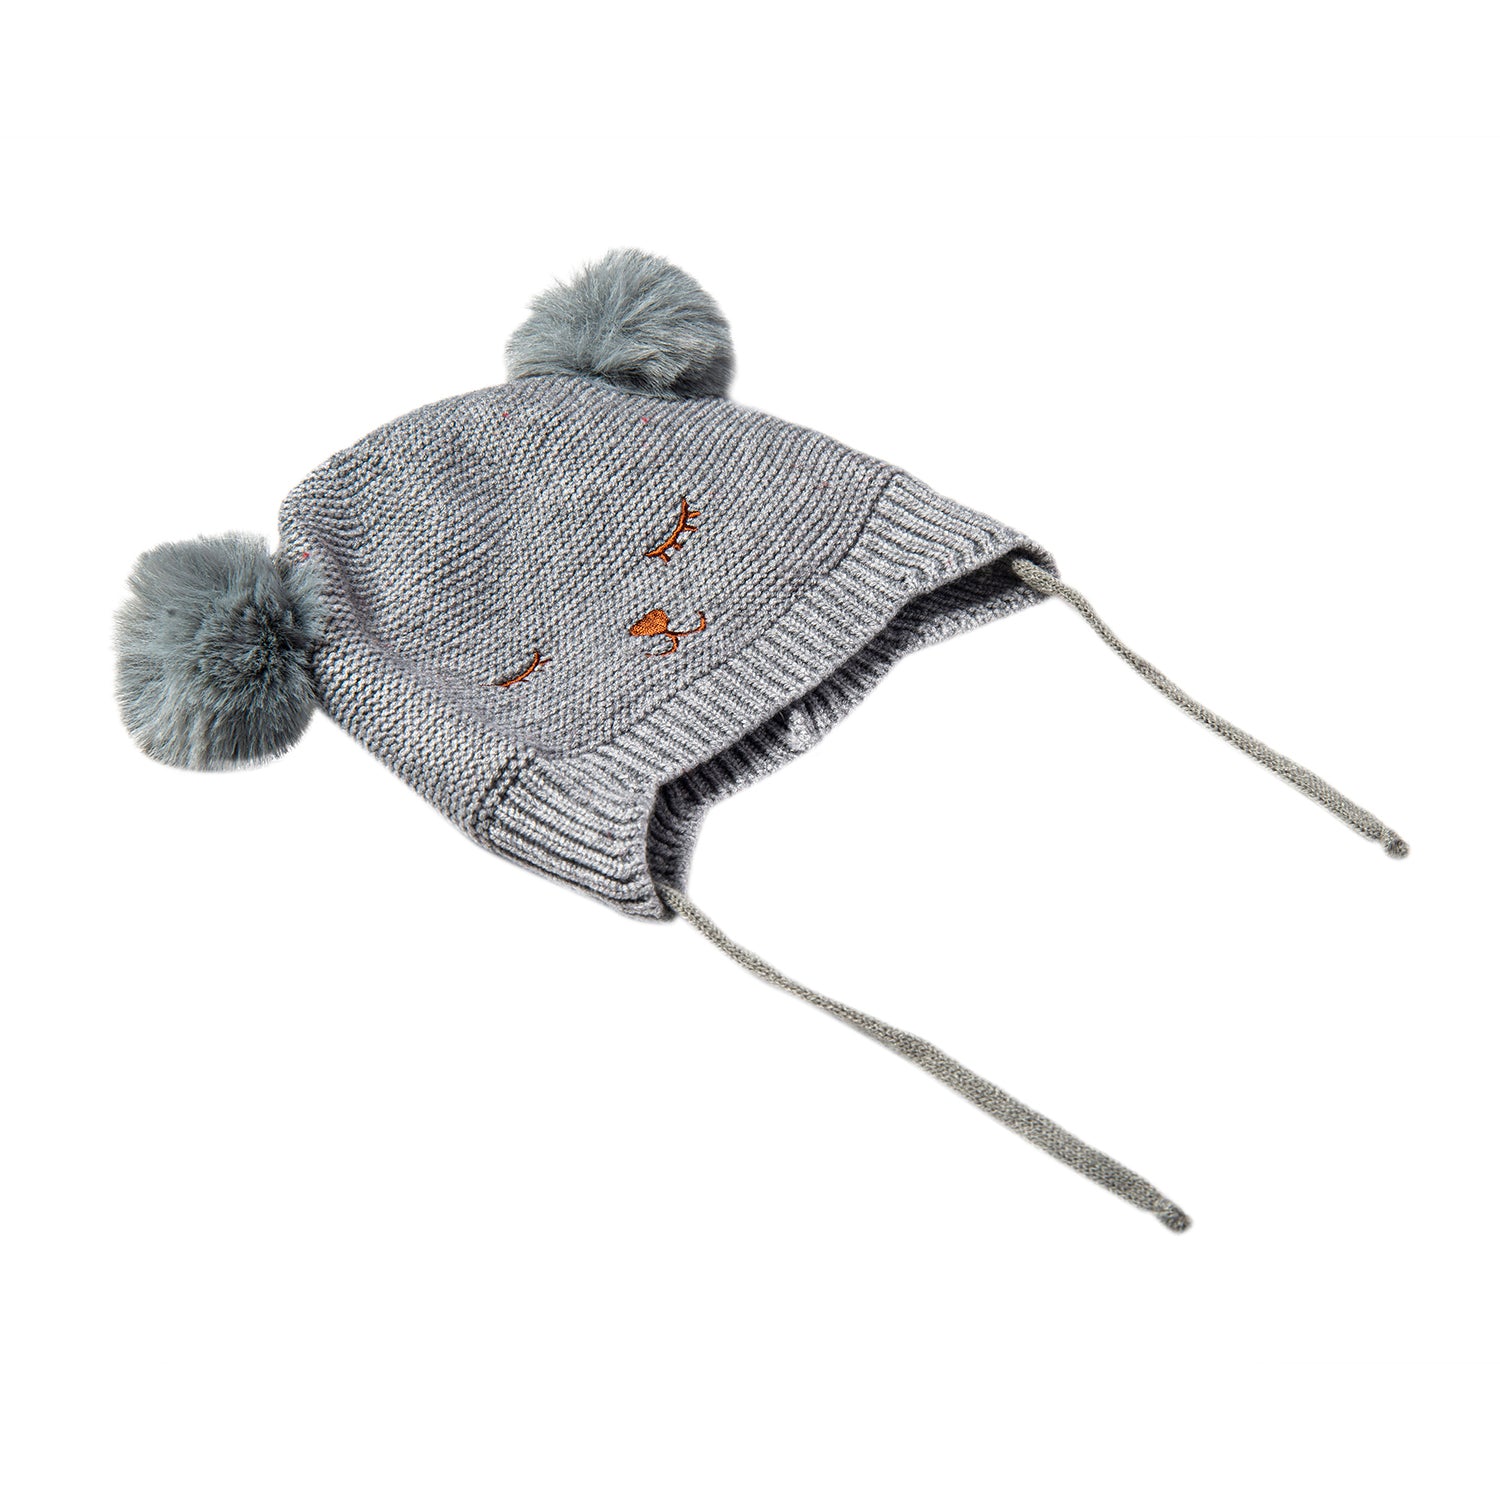 Knit Woollen Cap With Tie Knot For Ear Cover Sleeping Pom Pom Grey - Baby Moo